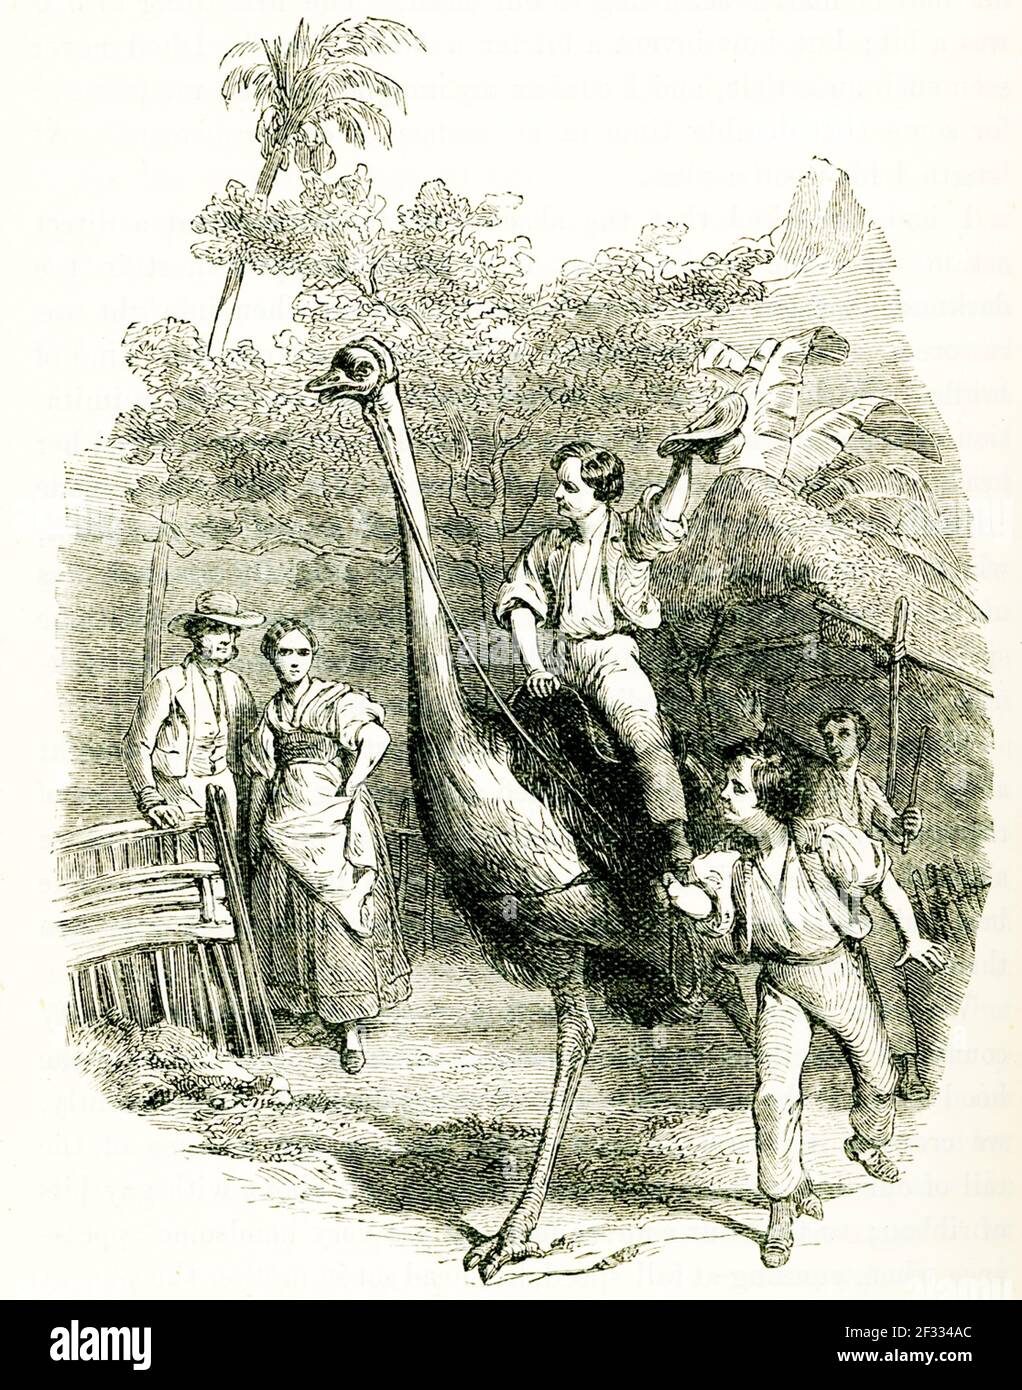 Swiss Family Robinson. The caption reads: “Riding an Ostrich.” The Swiss Family Robinson (German: Der Schweizerische Robinson) is a novel by Johann David Wyss, first published in 1812, about a Swiss family of immigrants whose ship en route to Port Jackson, Australia, goes off course and is shipwrecked in the East Indies Stock Photo